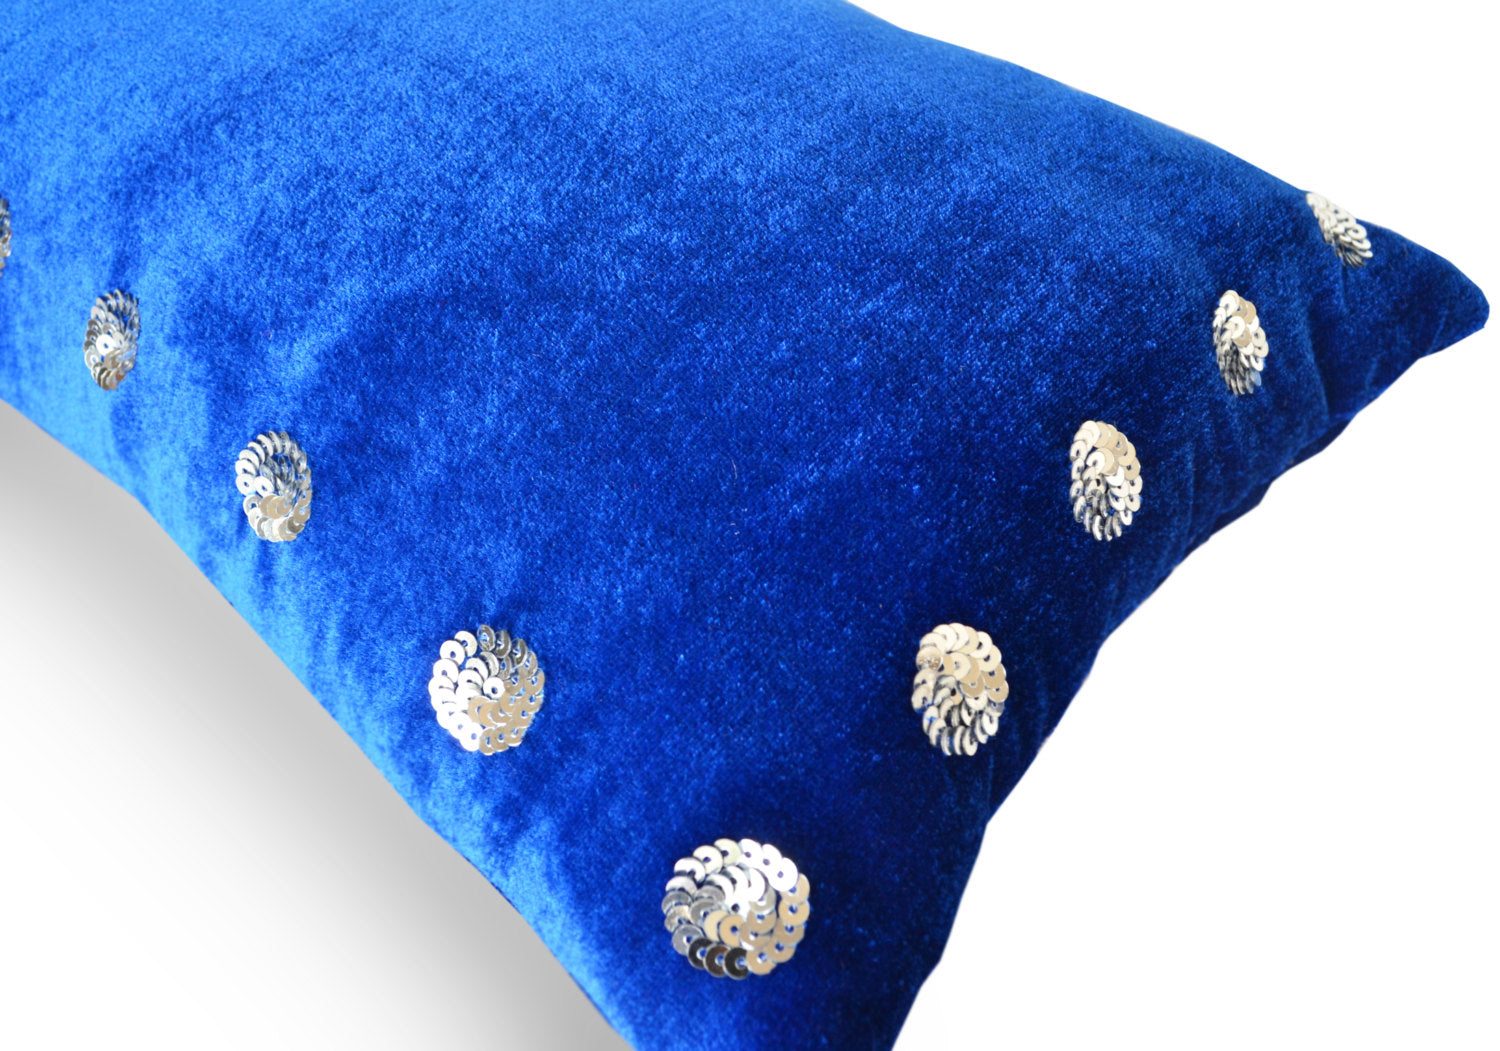 Amore Beaute Blue throw pillows makes a great add to your home decor or gift for spring and summer.